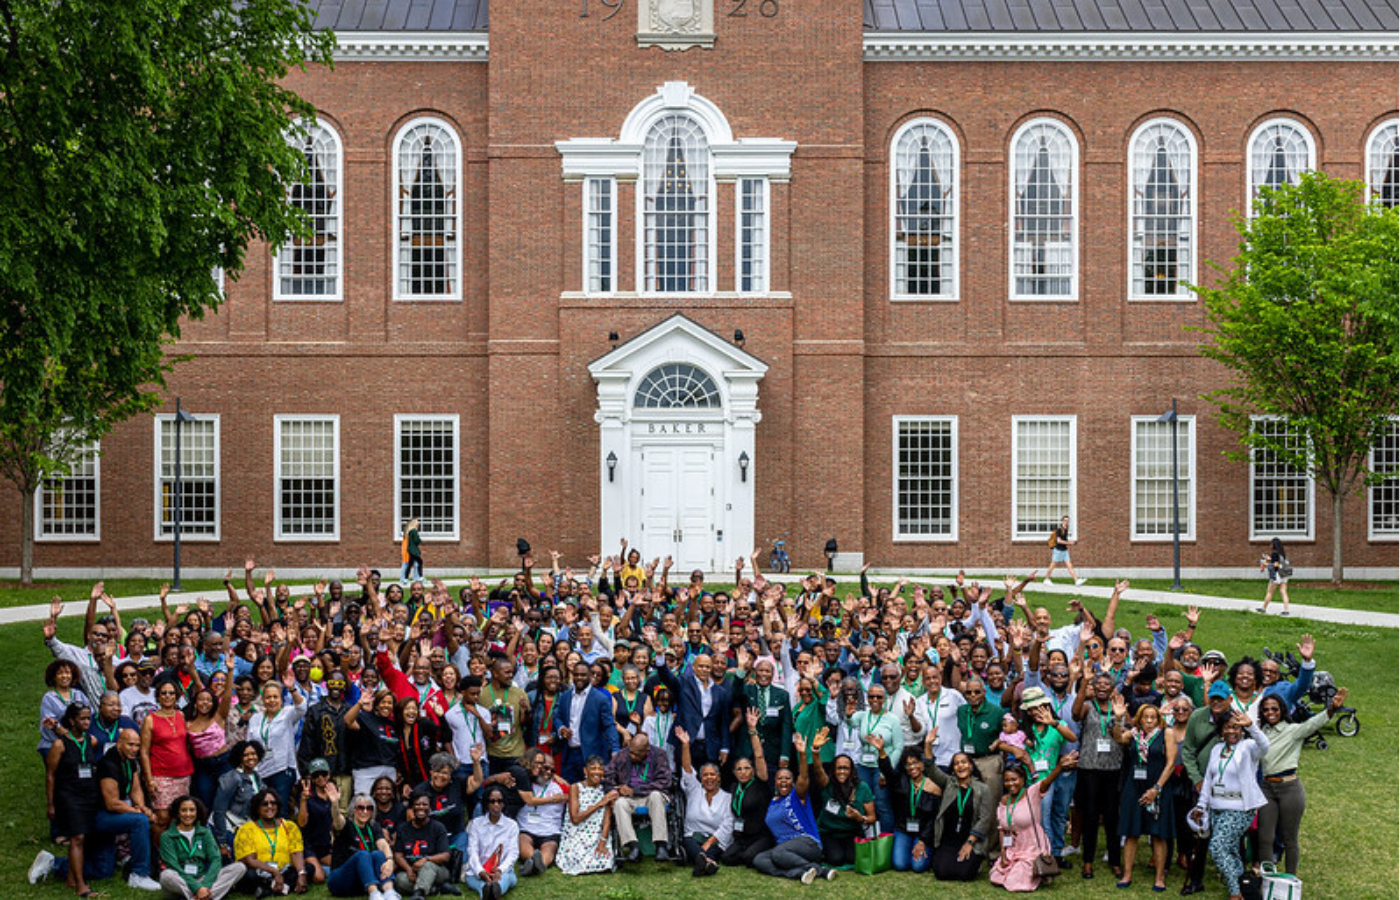 A group shot of the attendees of the BADA 50th reunion celebration posed on Baker Lawn.